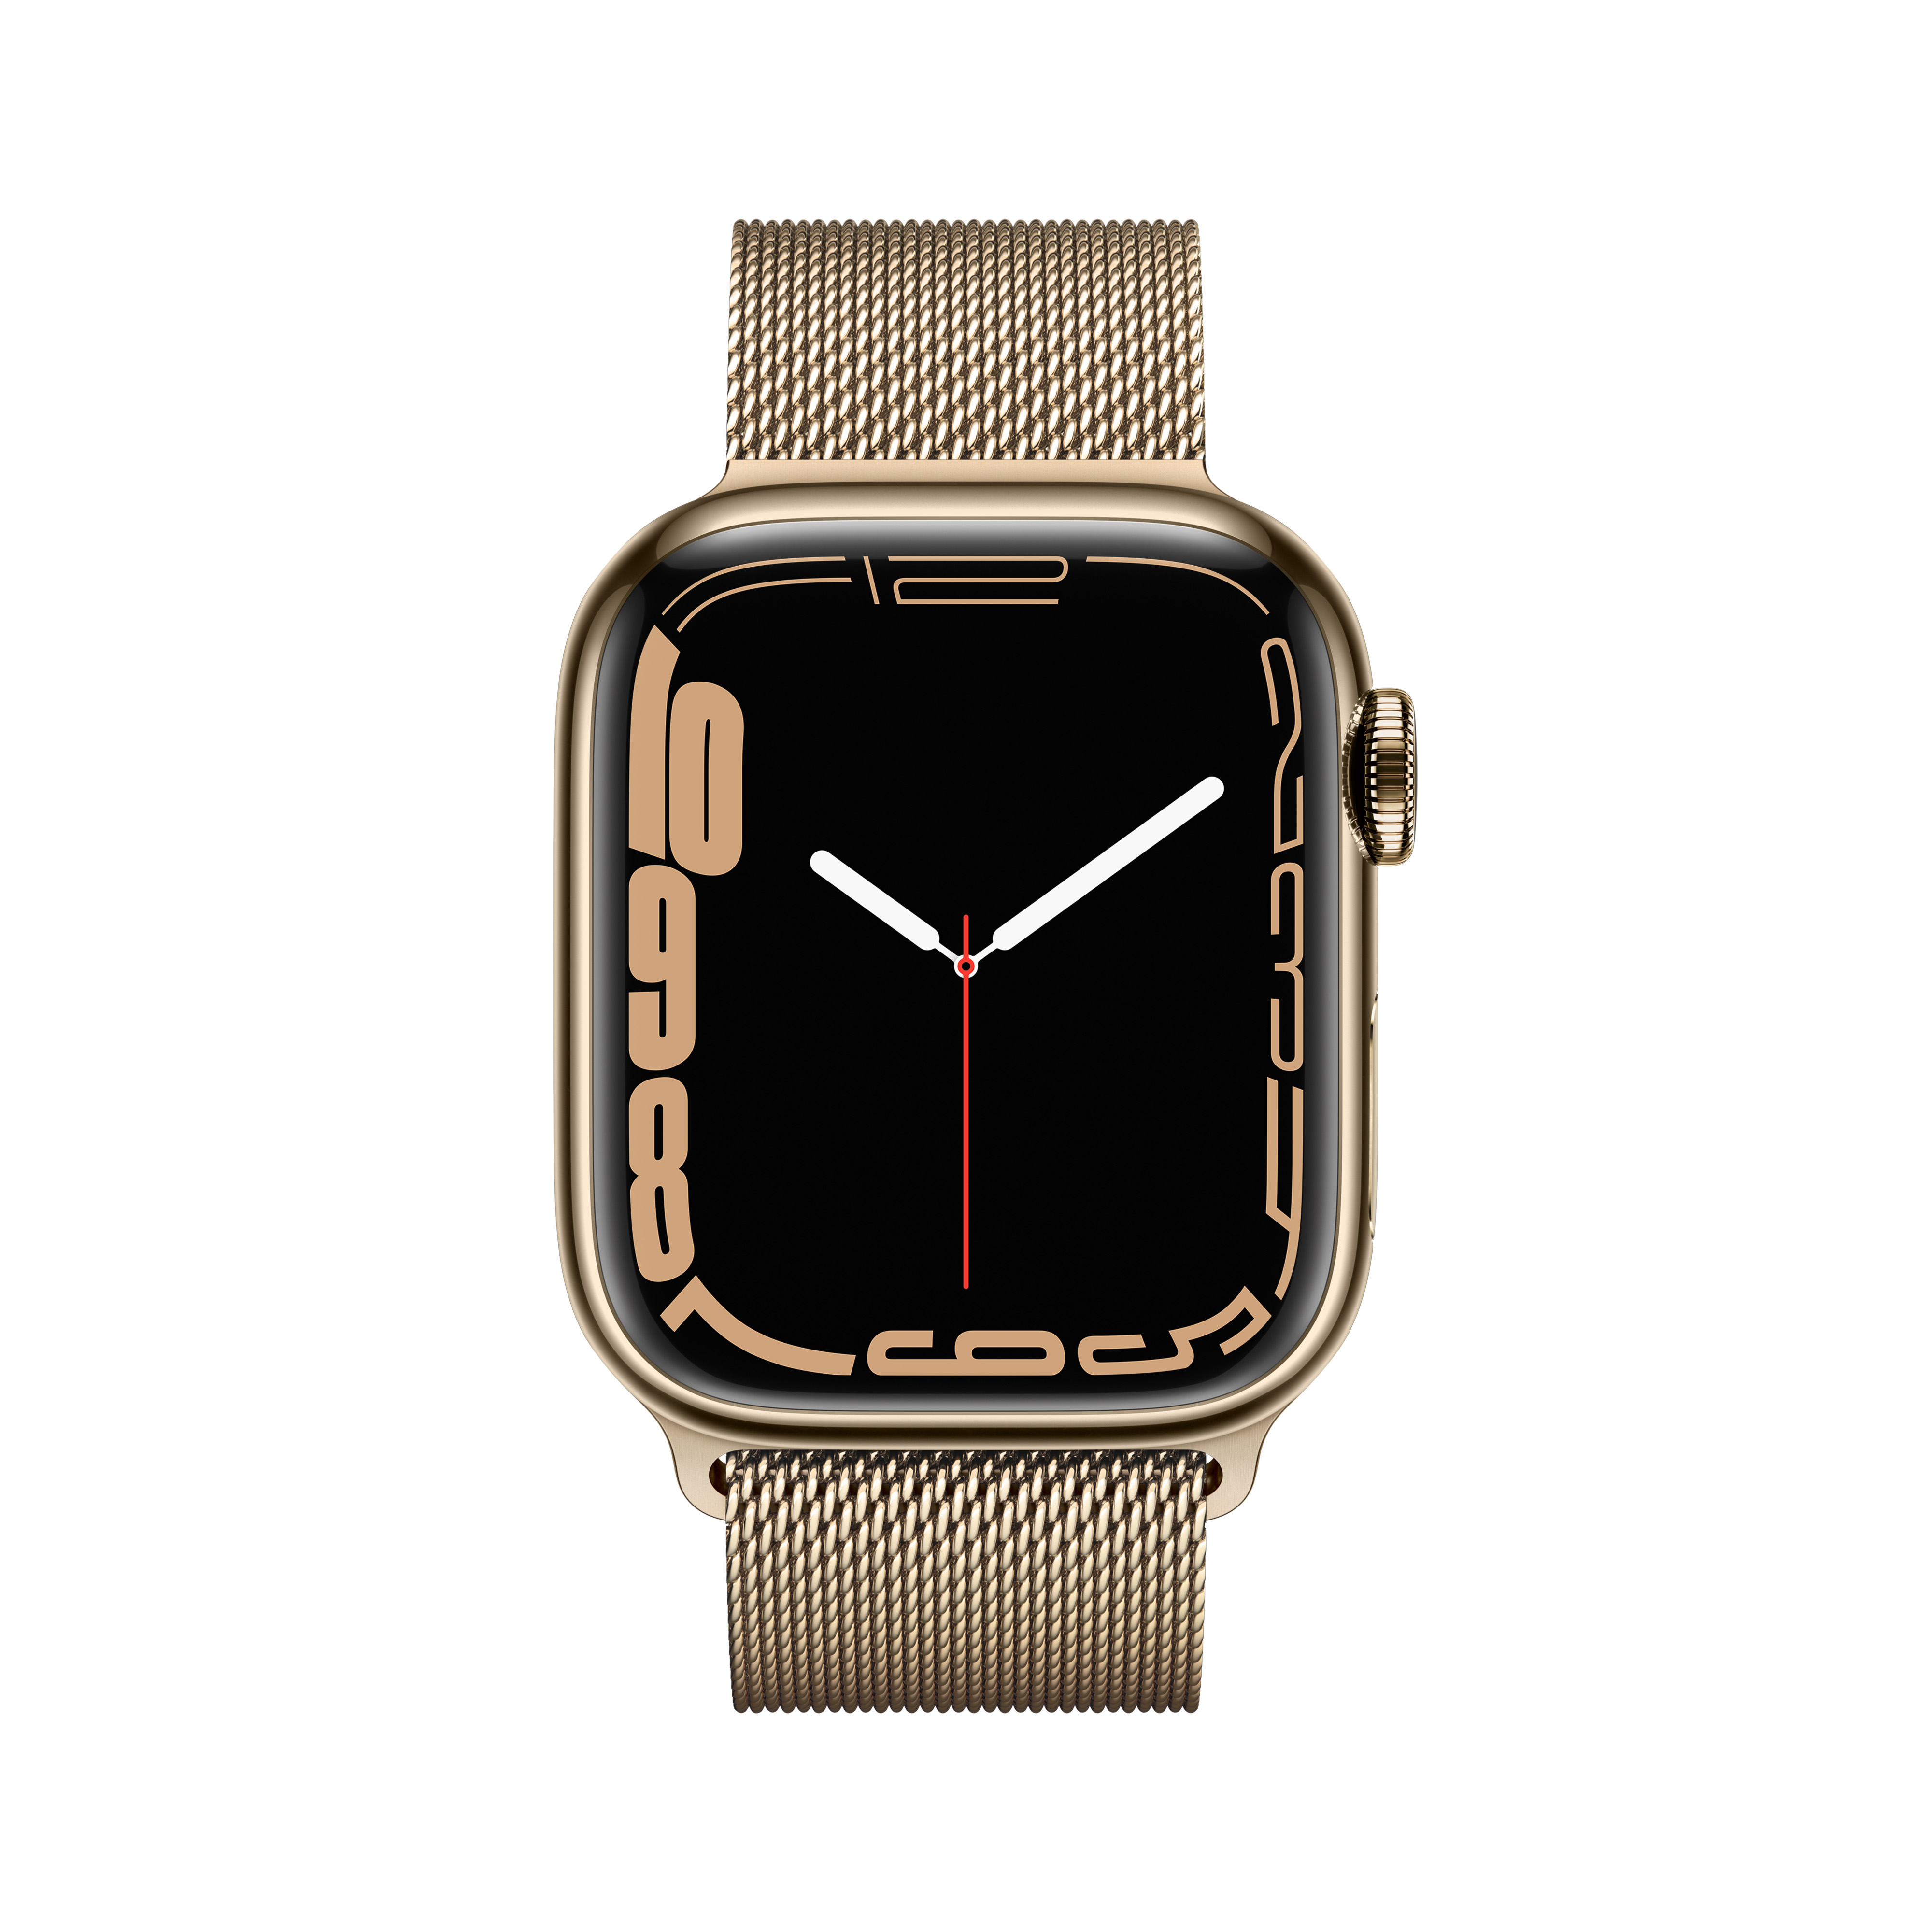 Apple_Watch_Series_7_Cell_41mm_Gold_Stainless_Steel_Gold_Milanese_Loop_PDP_Image_Position-2__VN.jpg